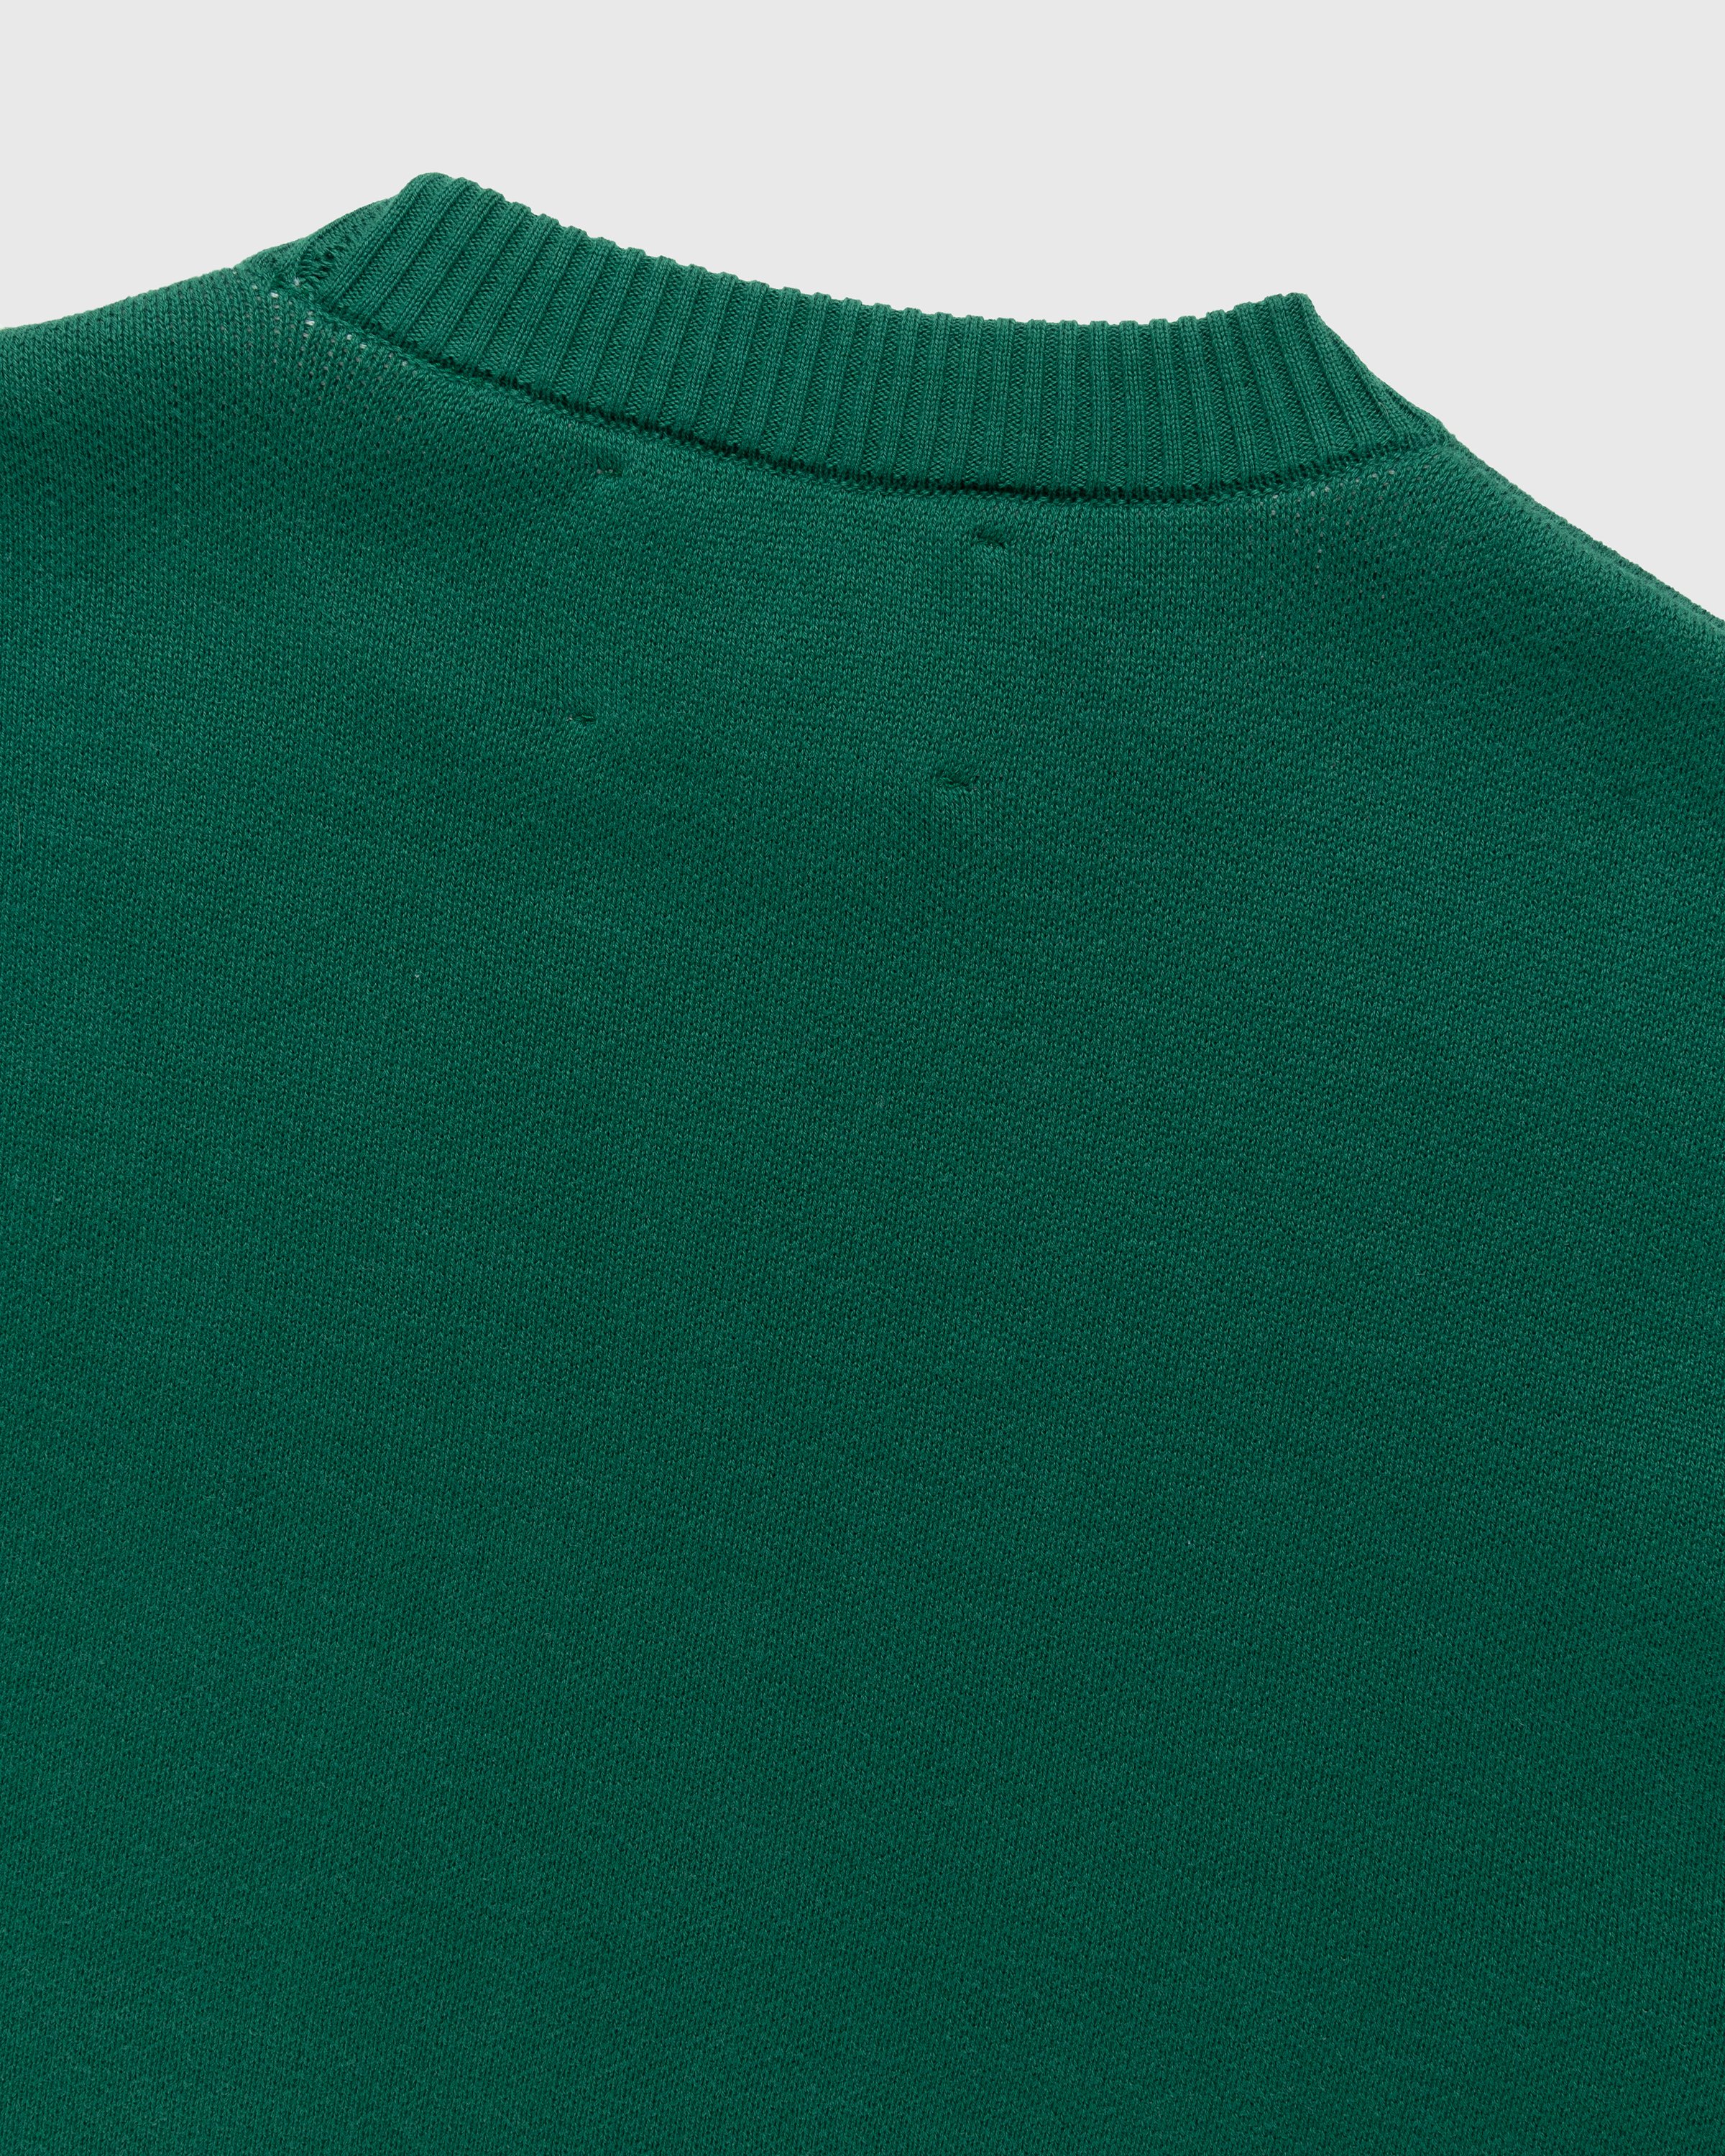 Highsnobiety - Not In Paris 4 Knitted Crewneck Sweater Green - Clothing - Green - Image 5